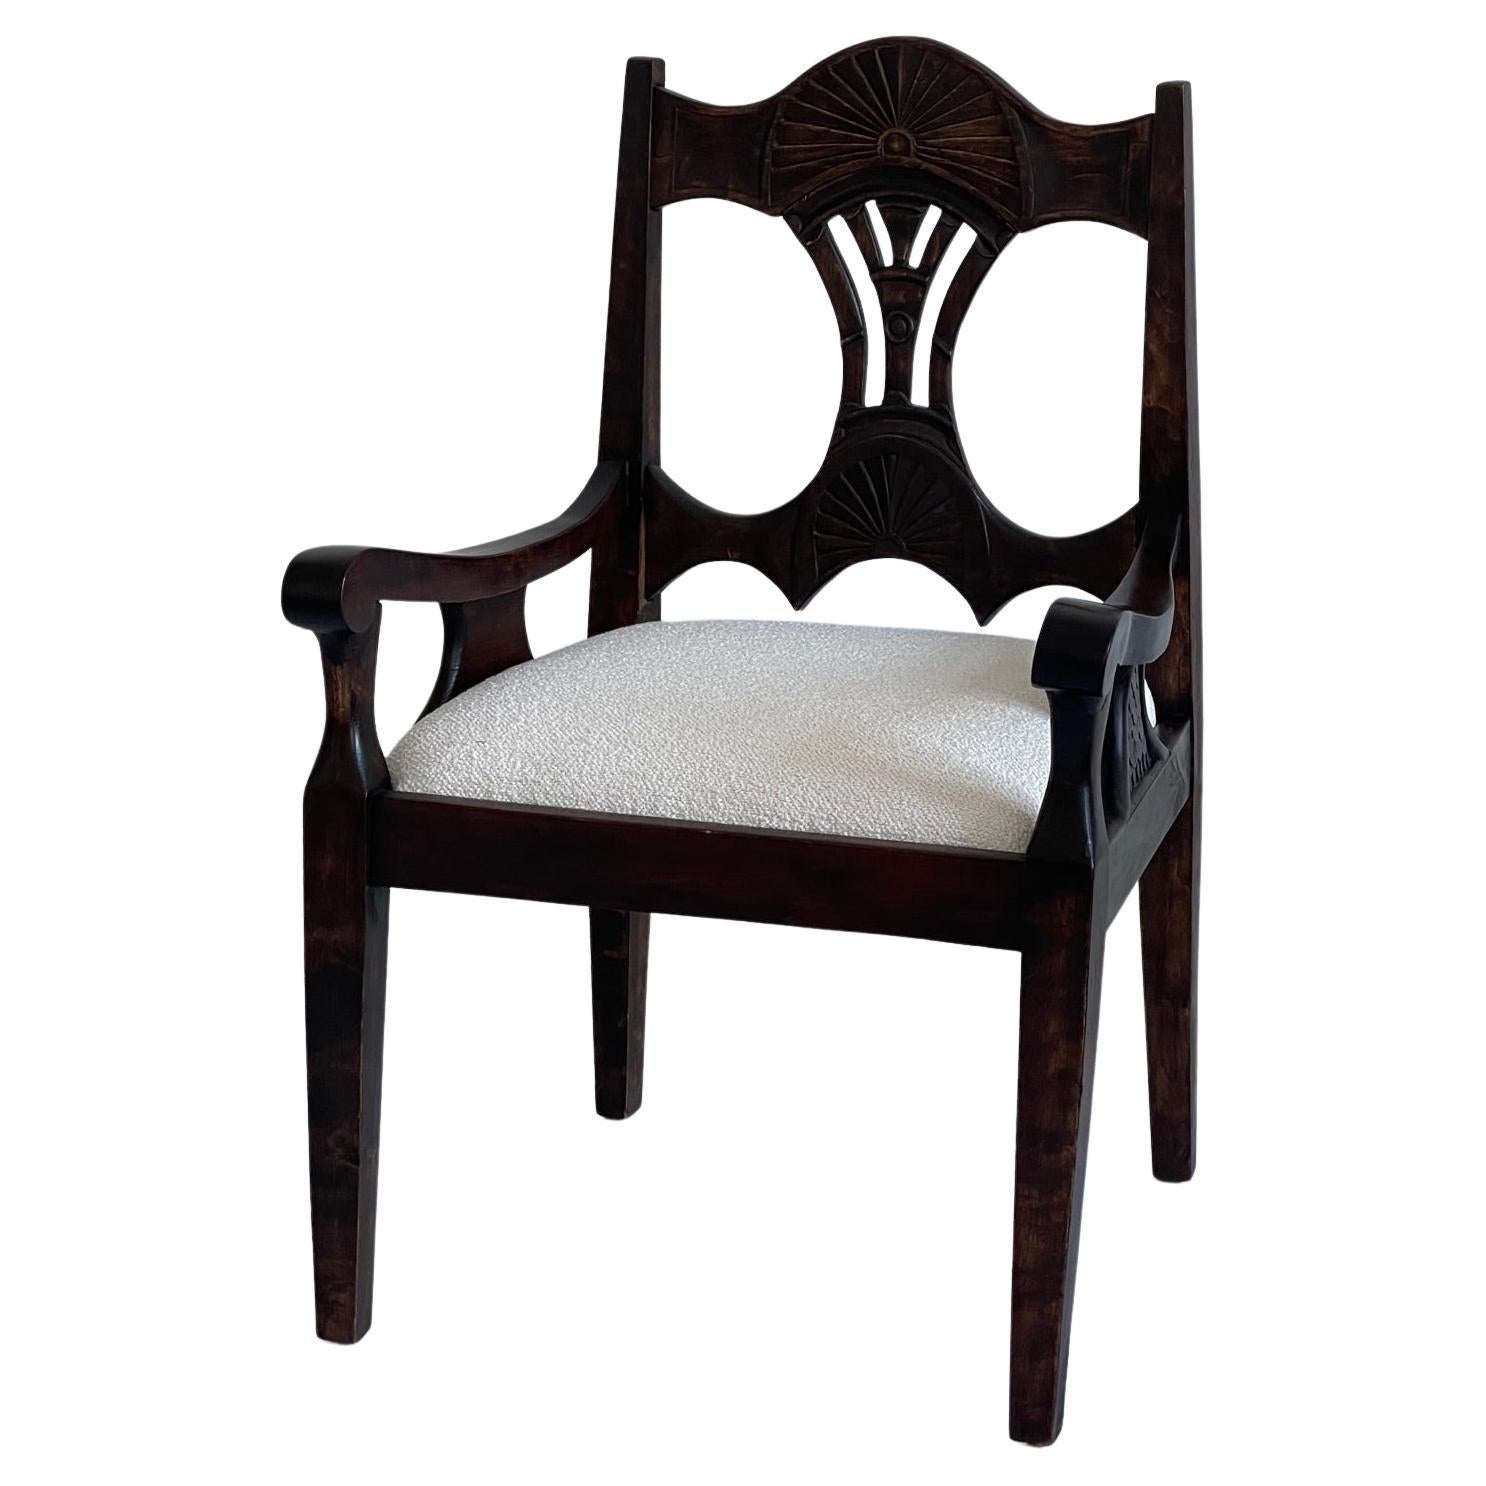 Elegant 19th century Scandinavian Art Nouveau armchair in solid stained oak upholstered in premium boucle fabric. 

Despite its age, this armchair is in remarkable condition, a testament to the quality of materials and craftsmanship.Carefully